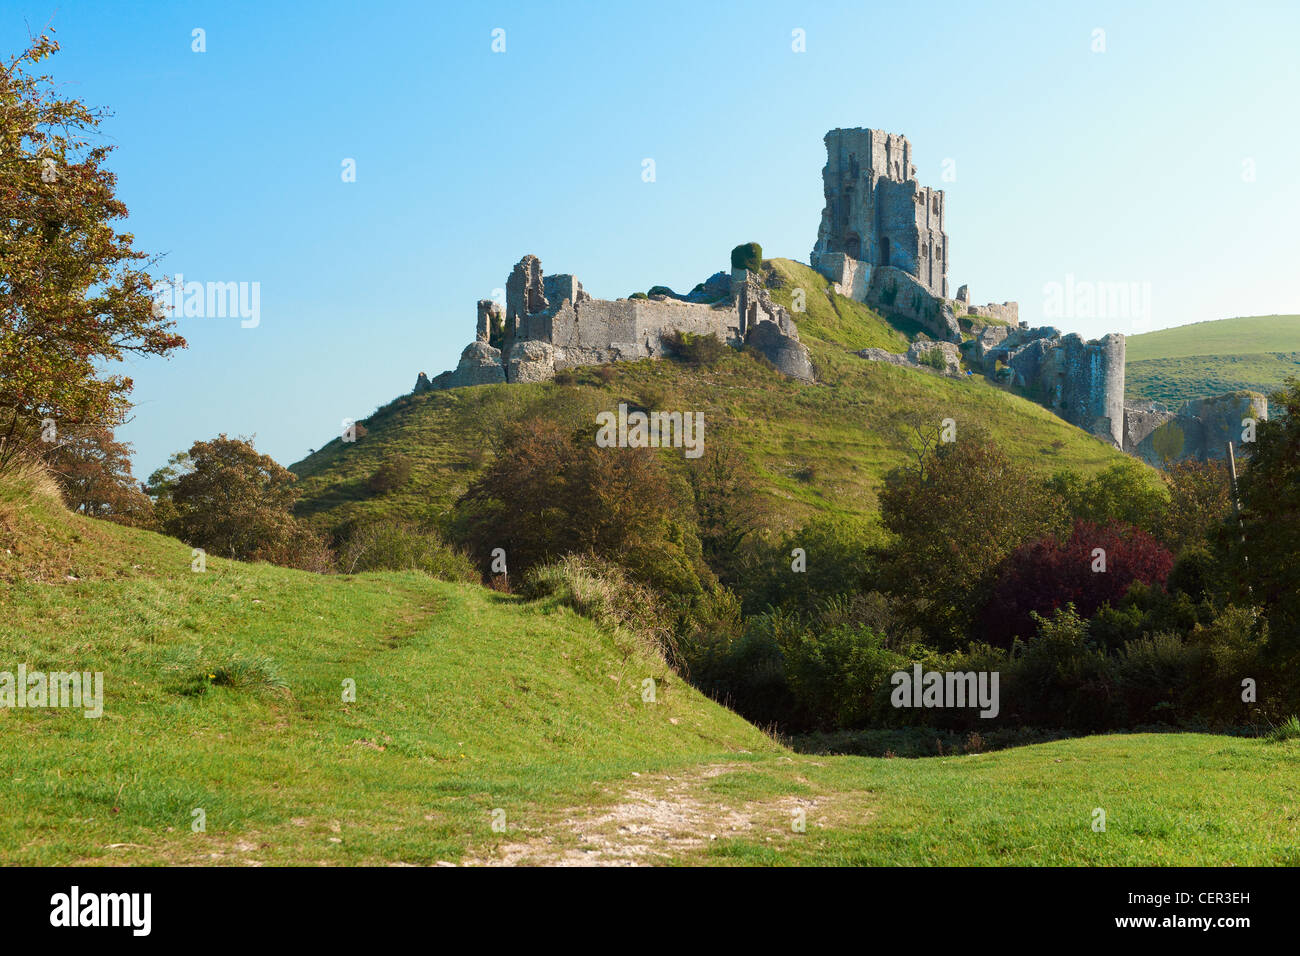 The ruins of the 11th century Corfe Castle in the Purbeck Hills. Stock Photo